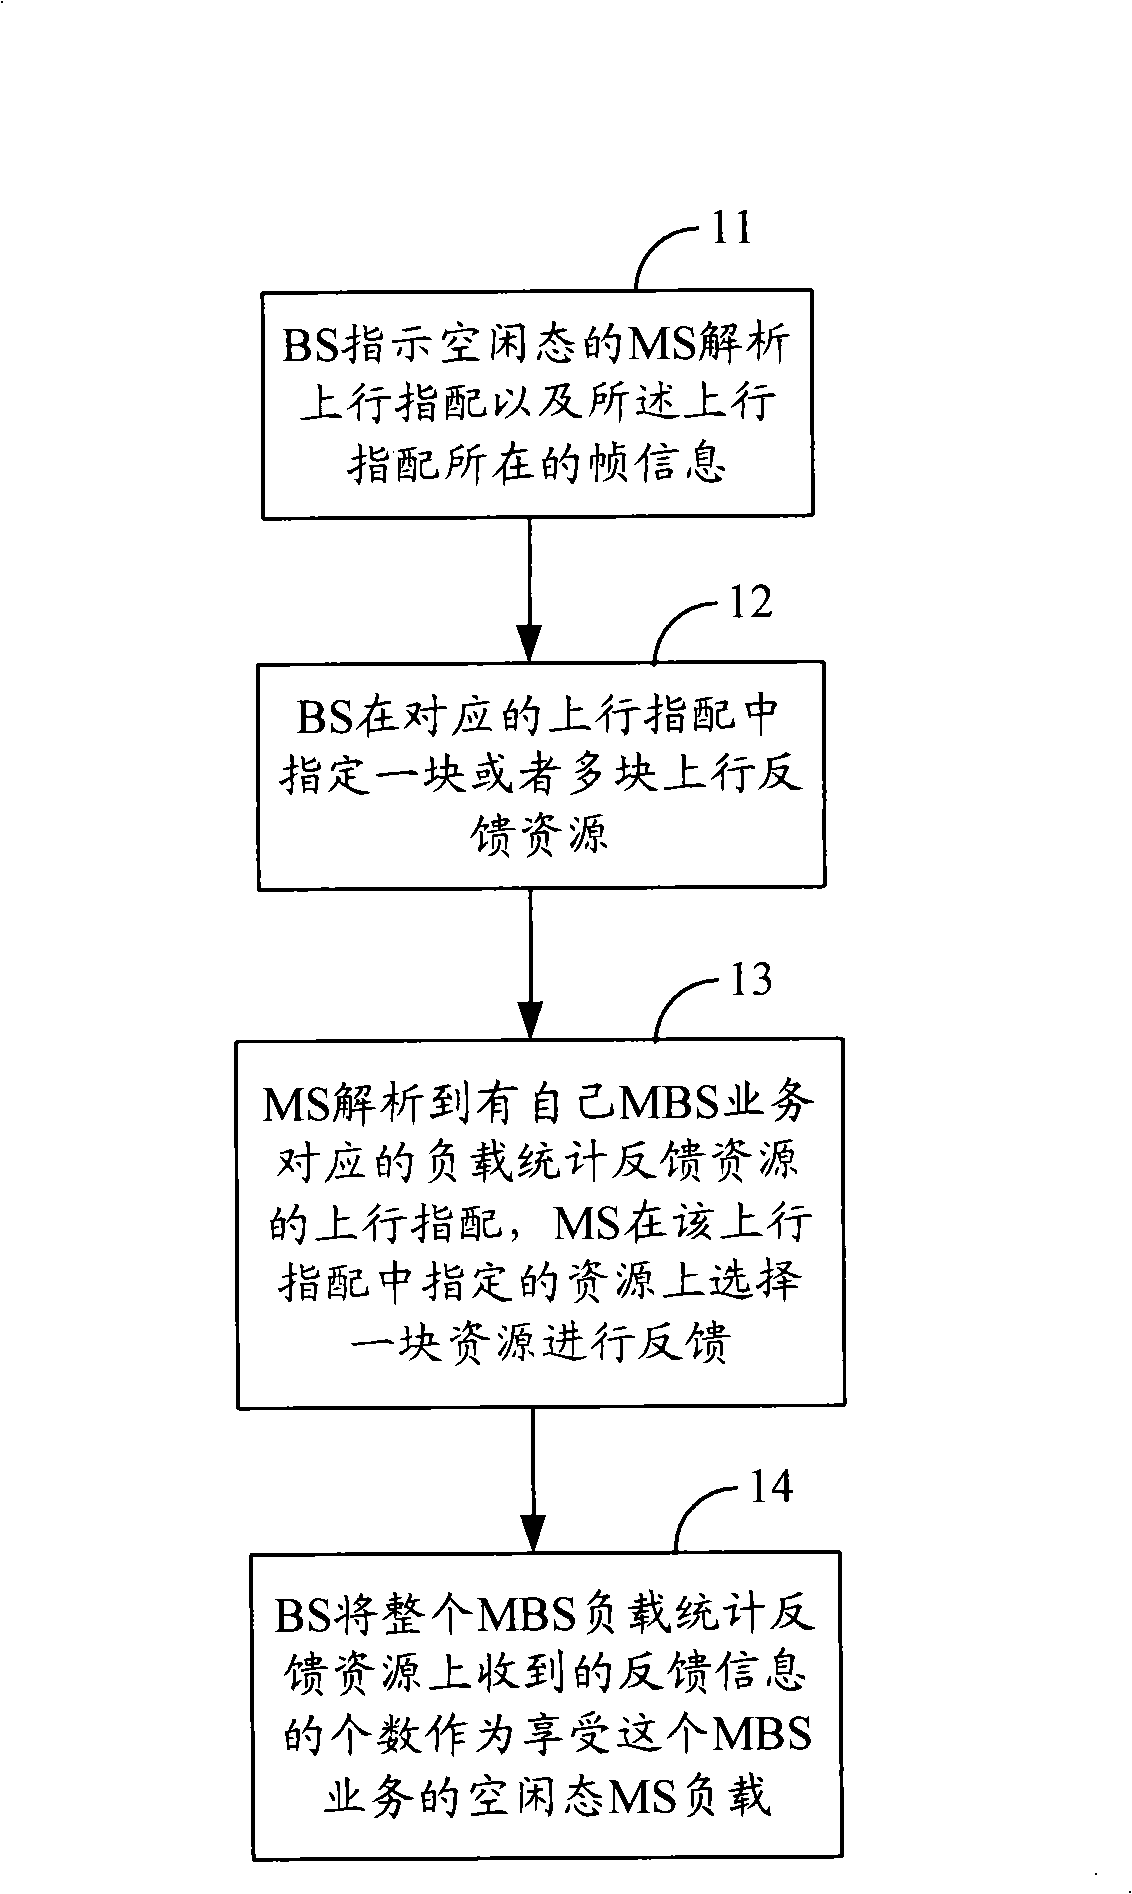 Method for statistic of multicast/broadcast service load and relevant equipment